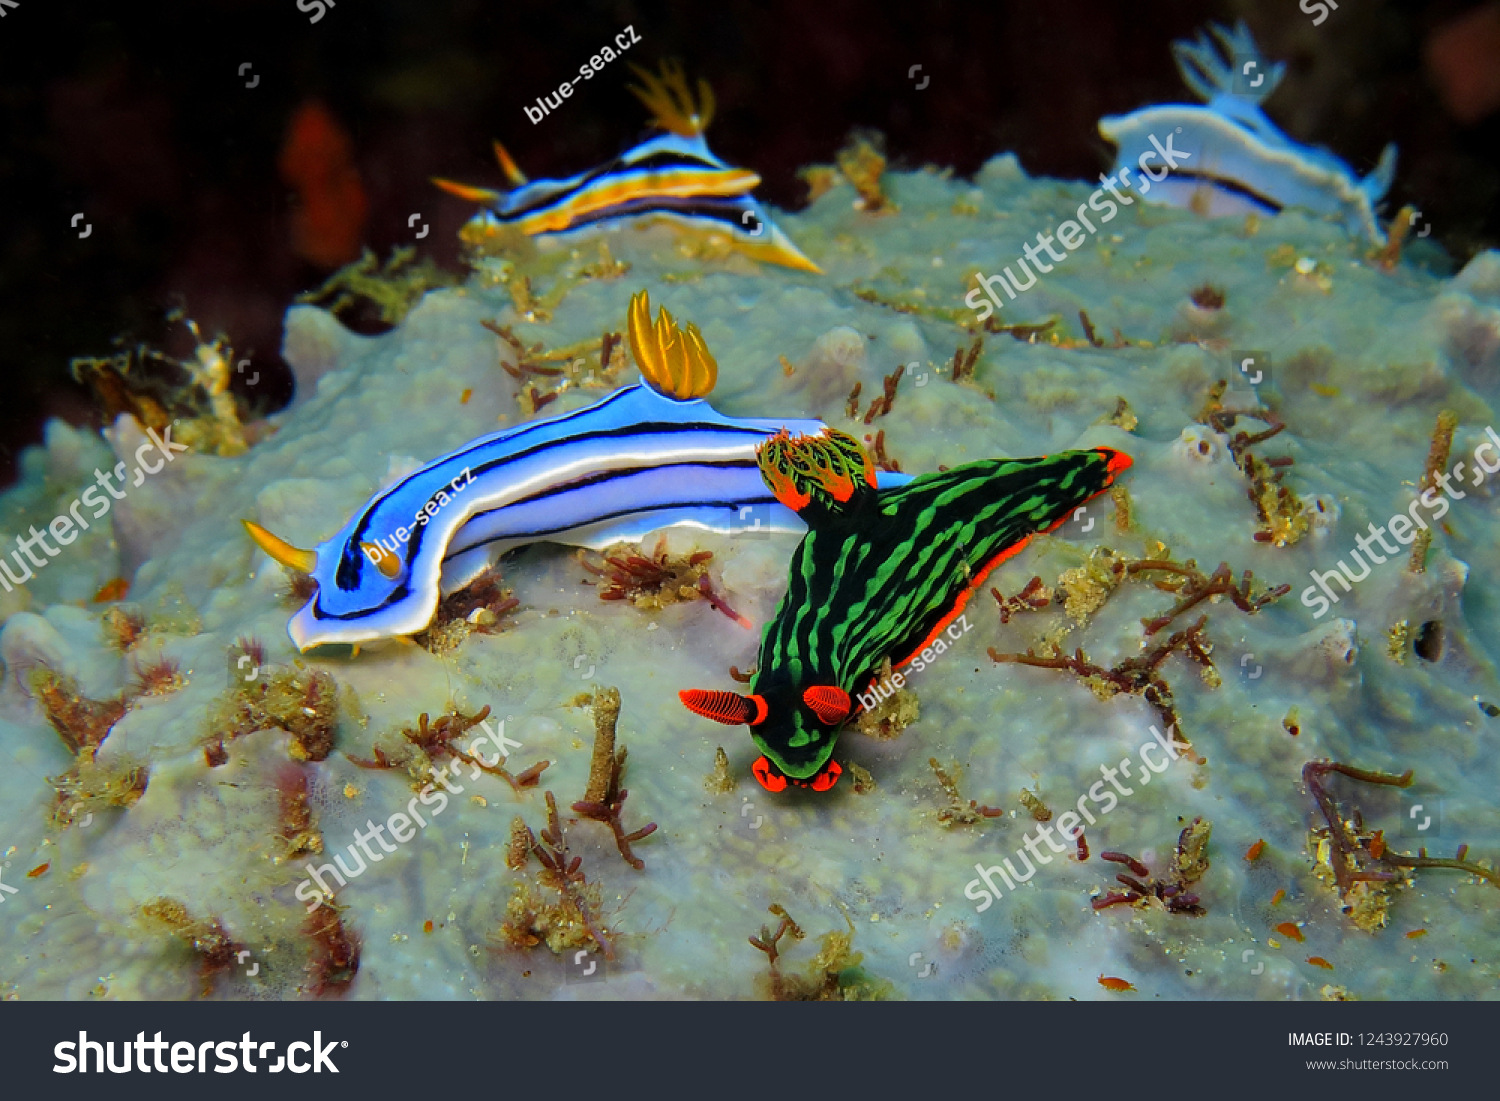 Group of the colorful underwater nudibranch on the coral reef. Underwater photography of different nudibranchs. Night scuba diving with tropical marine animals. #1243927960